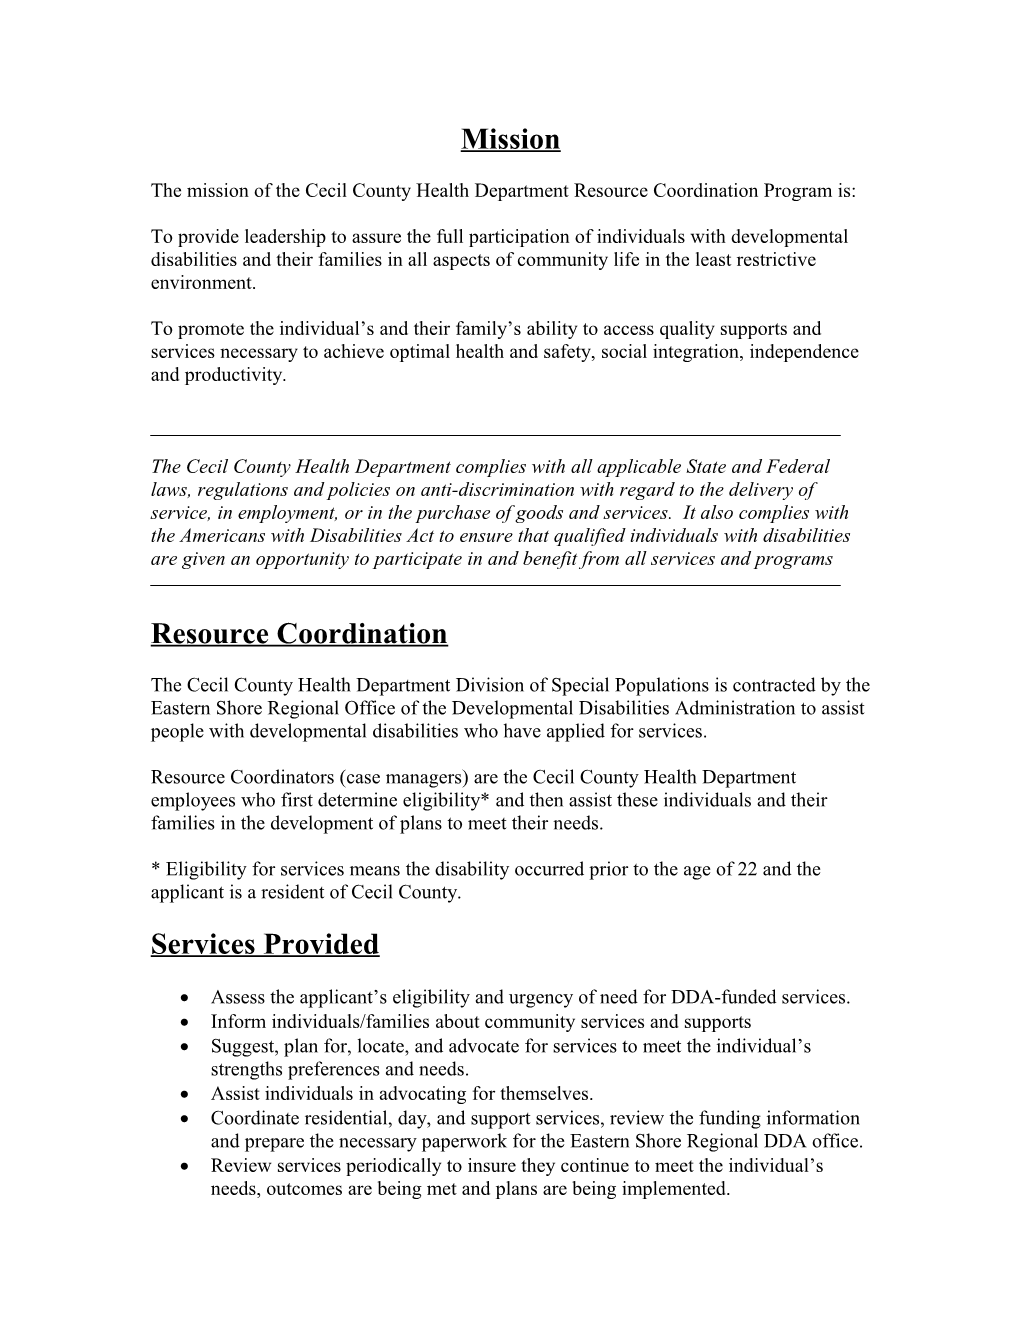 The Mission of the Cecil County Health Department Resource Coordination Program Is